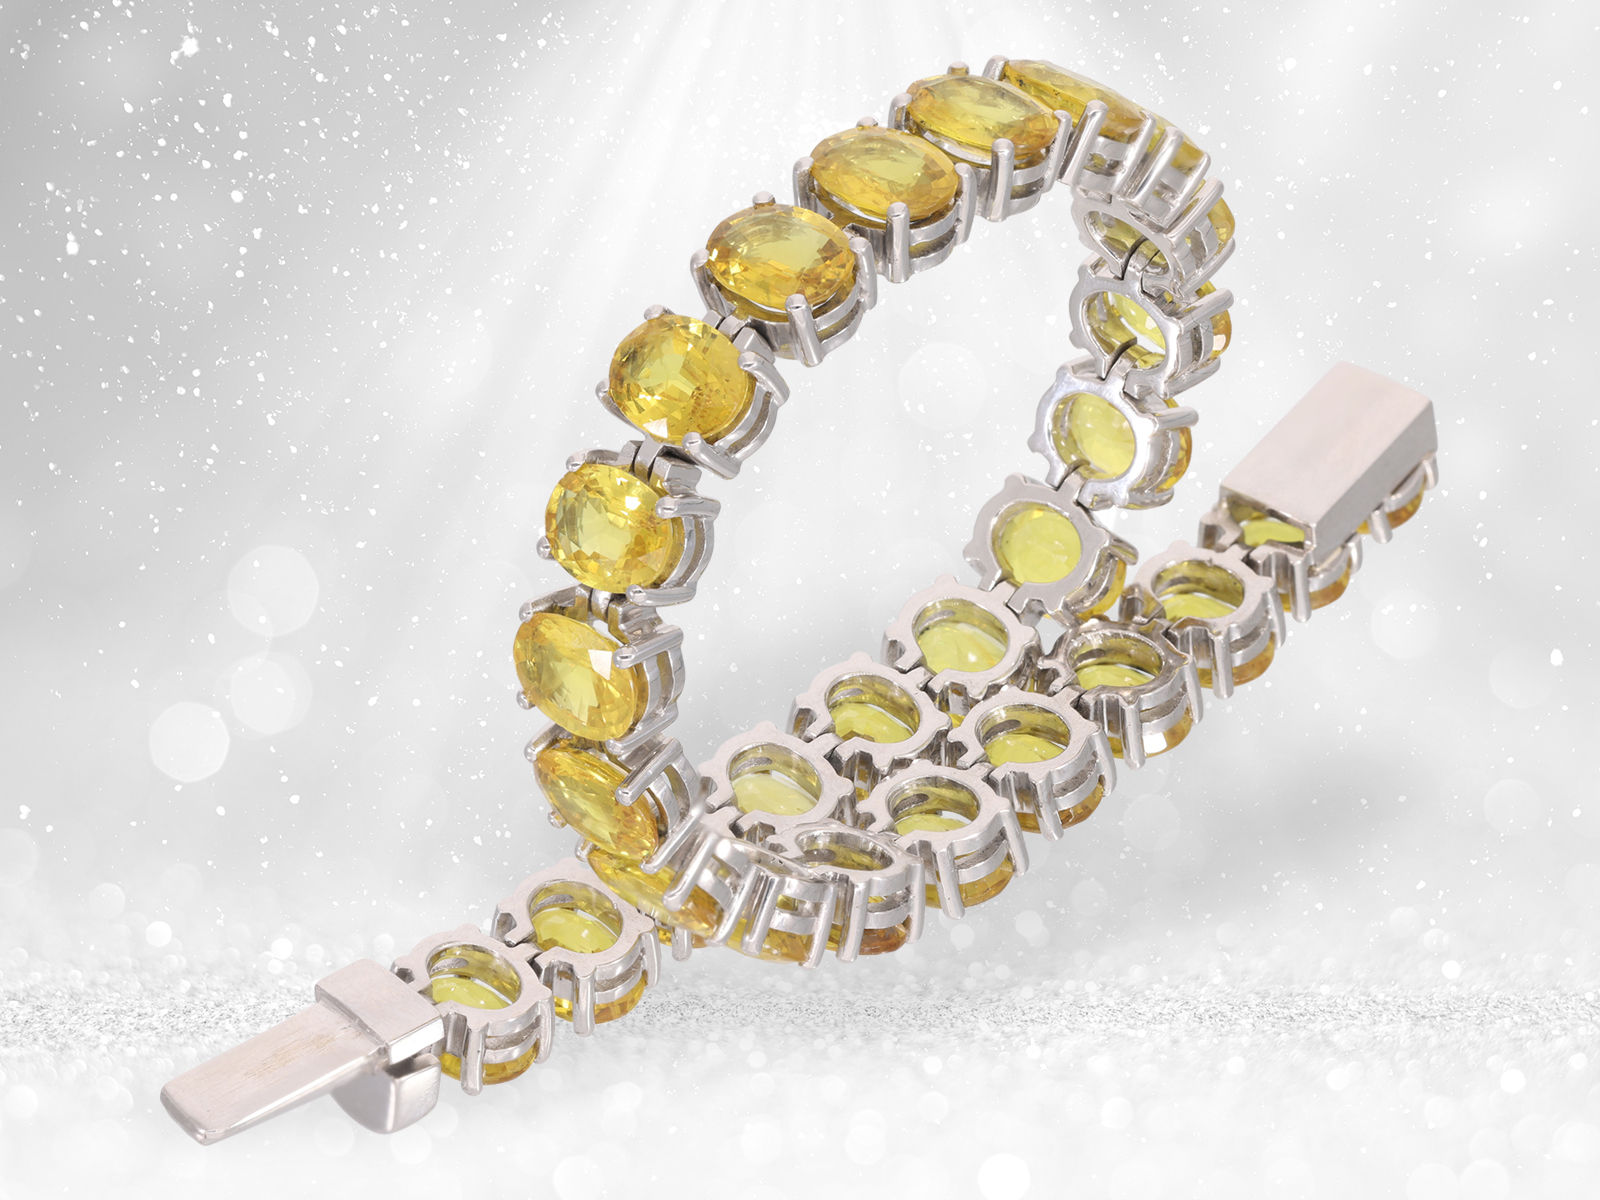 Modern 18K goldsmith's bracelet with yellow sapphires totalling approx. 42ct, valuable handwork by S - Image 4 of 4